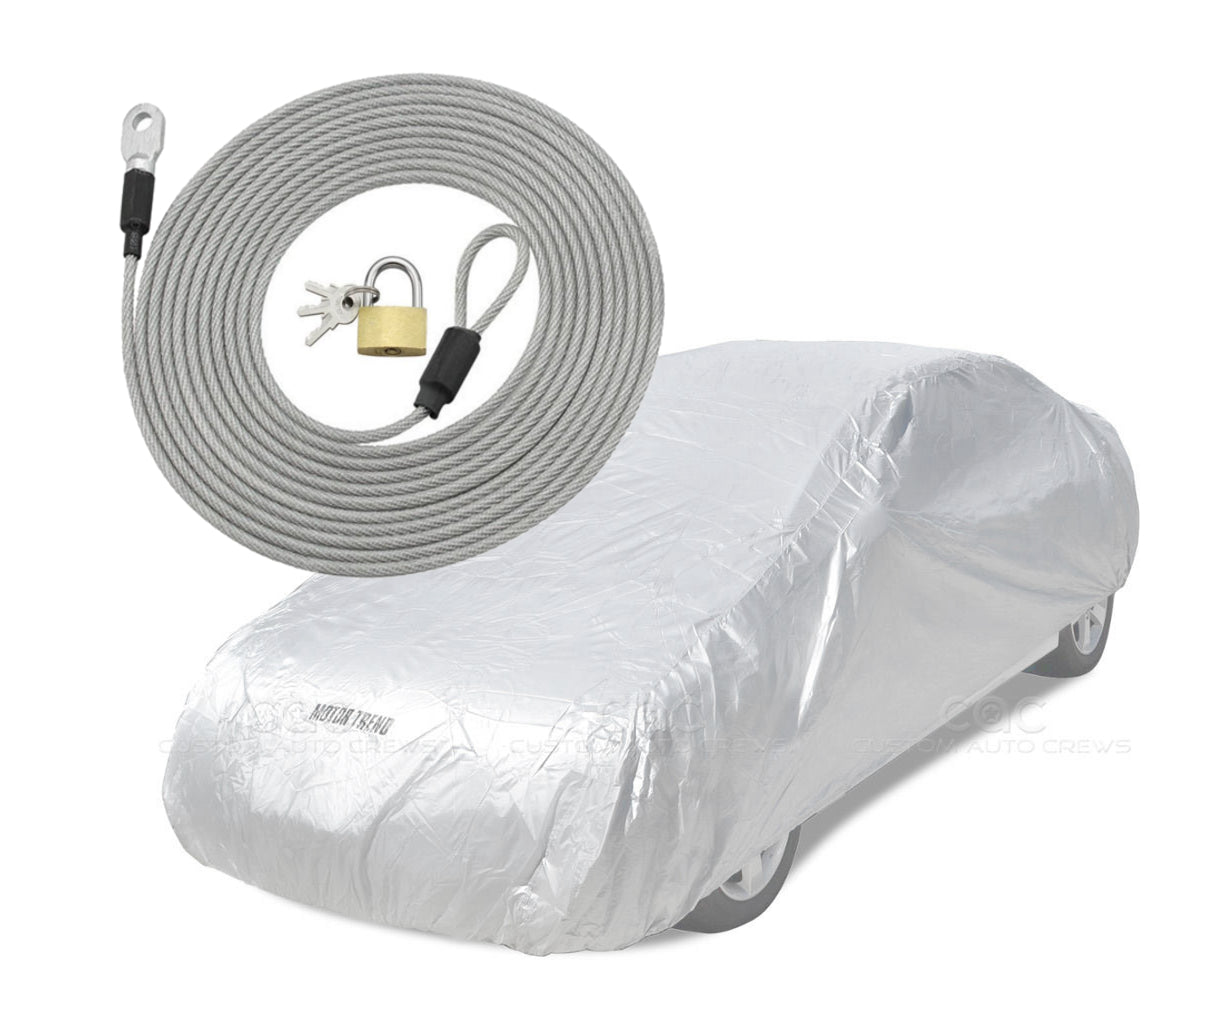 Stainless Steel Car Cover Lock & Cable